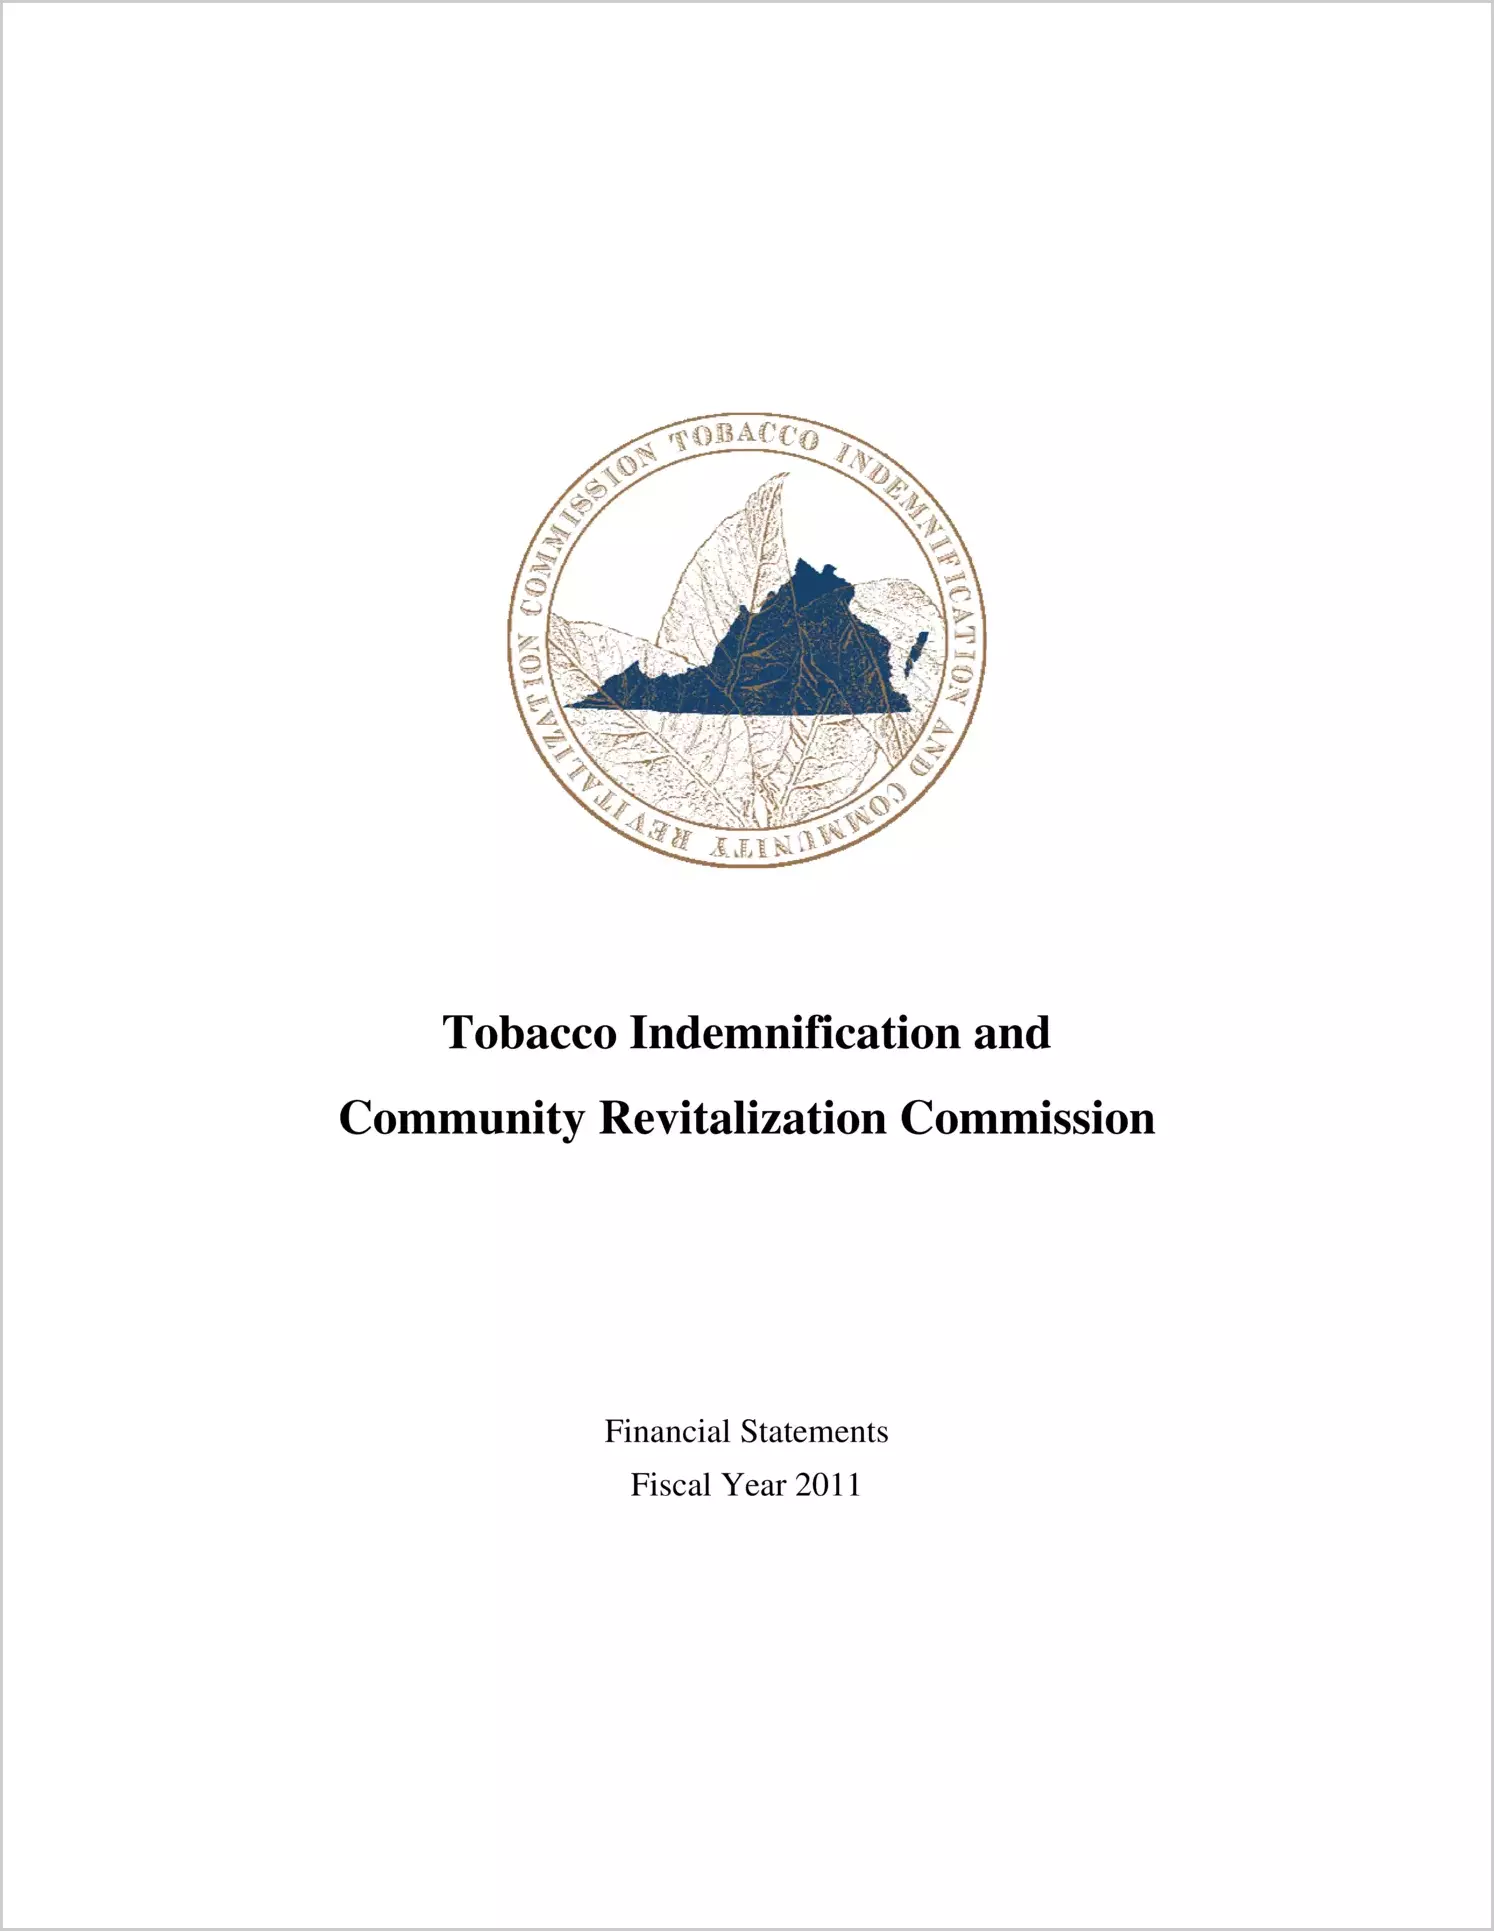 Tobacco Indemnification and Community Revitalization Commission Financial Statemenst for the year ended June 30, 2011